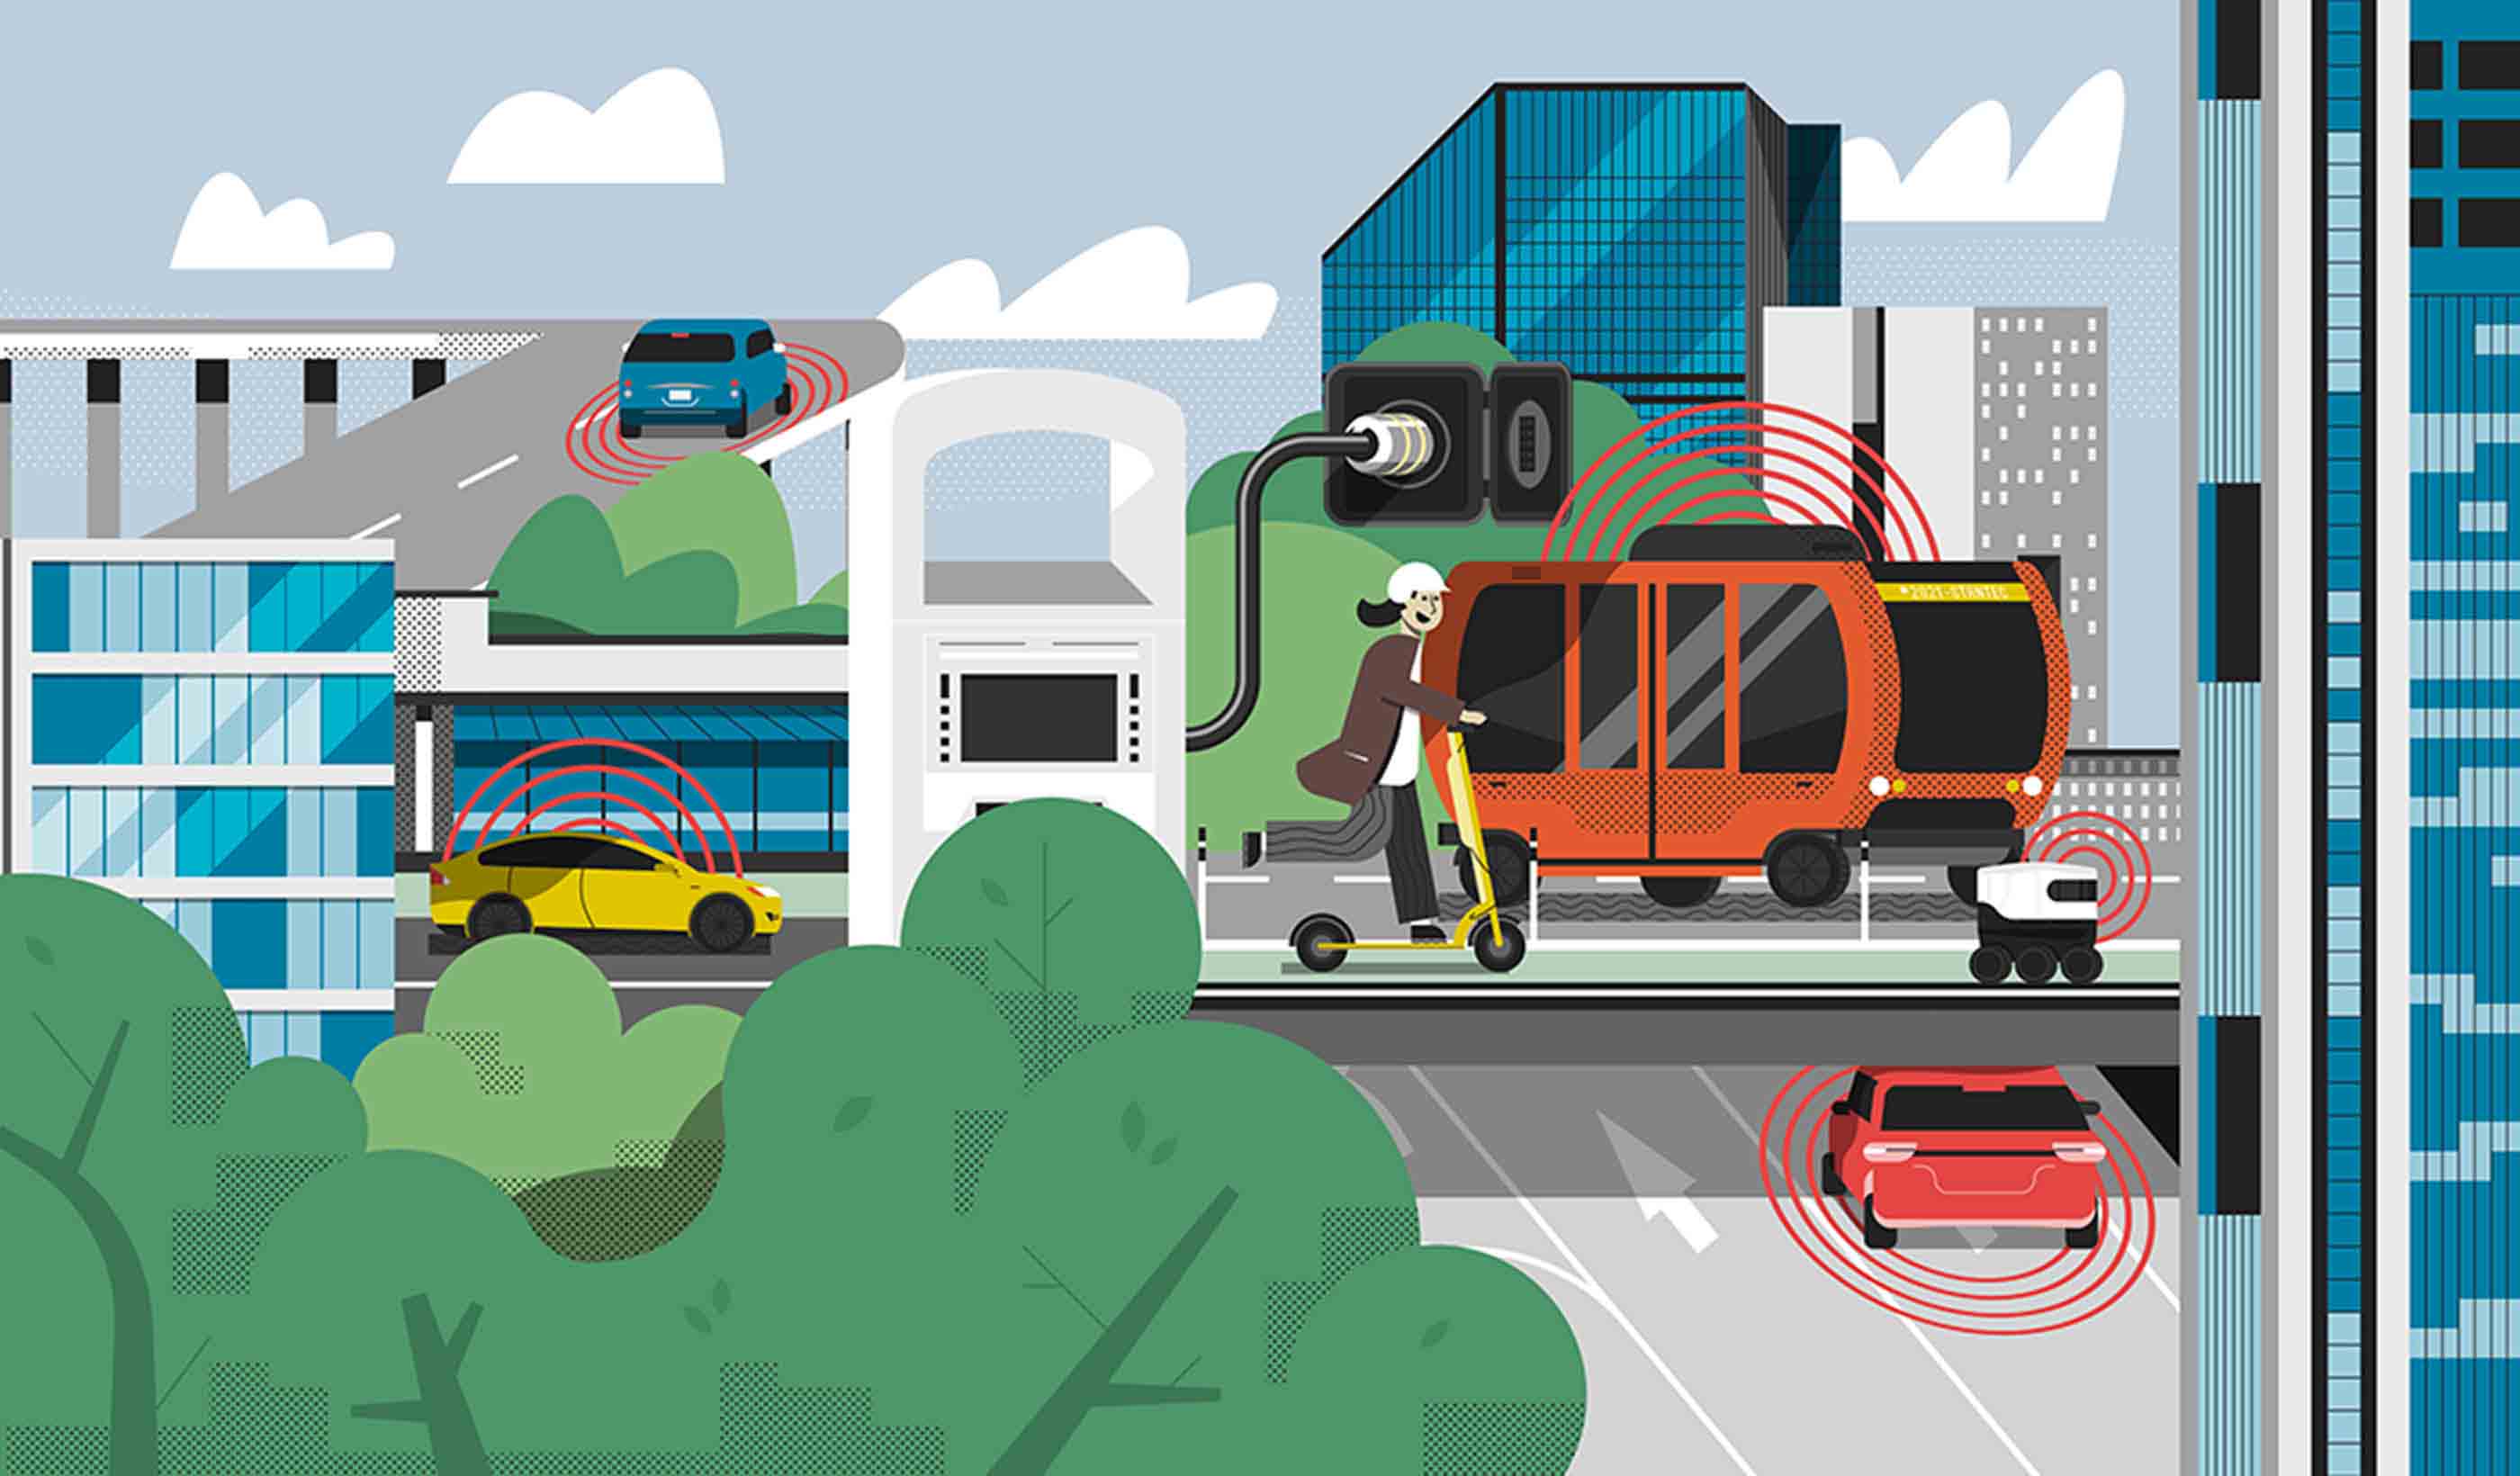 EV is the bridge to transit’s AV revolution—and now is the time to start building it